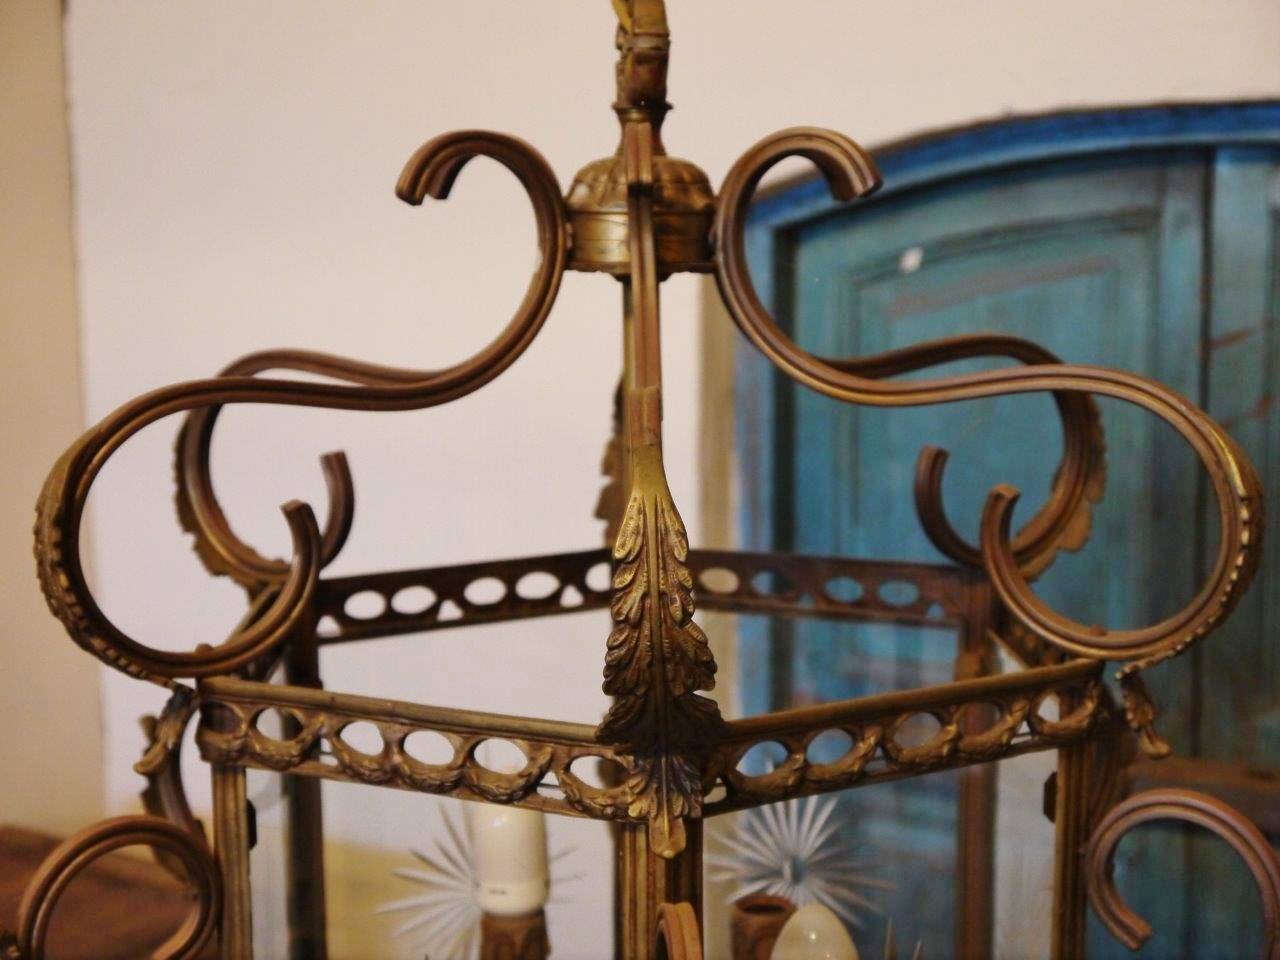 A fine quality 19th century ornate bronze lantern with four panels of etched glass & bevelled glass. Rewired to Australian standards with six candle style lamp holders and aged bronze chain with small ceiling rose.